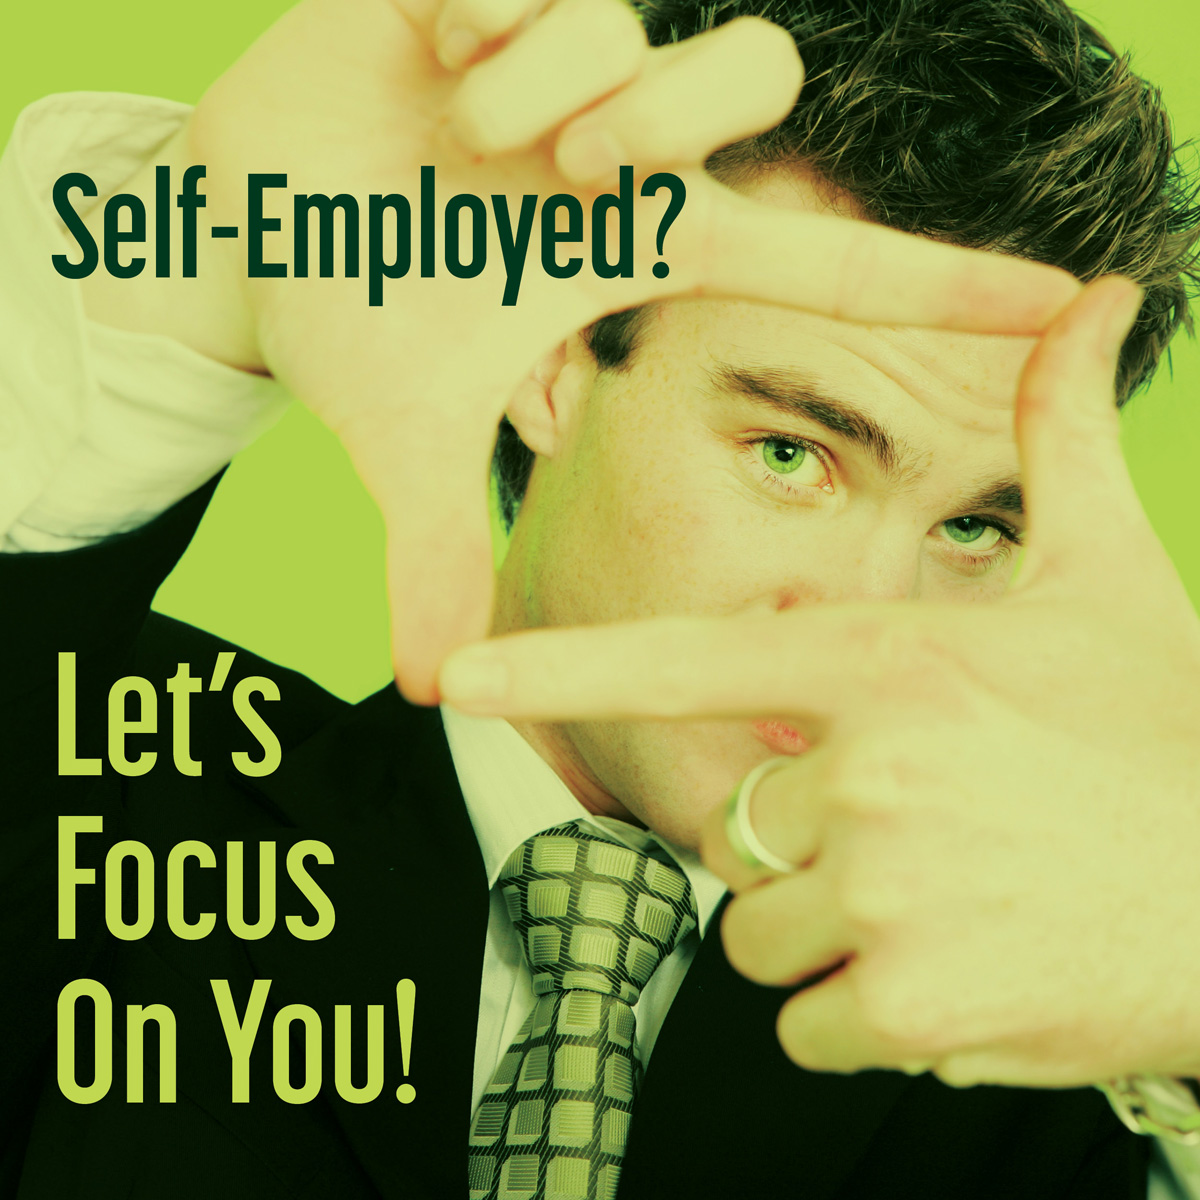 Self-employed and overwhelmed with all the things on your plate? Let me help make getting a loan stress-free for you. Give me a call and let's figure out the best solution together! #selfemployed #loanapplication #simplicity